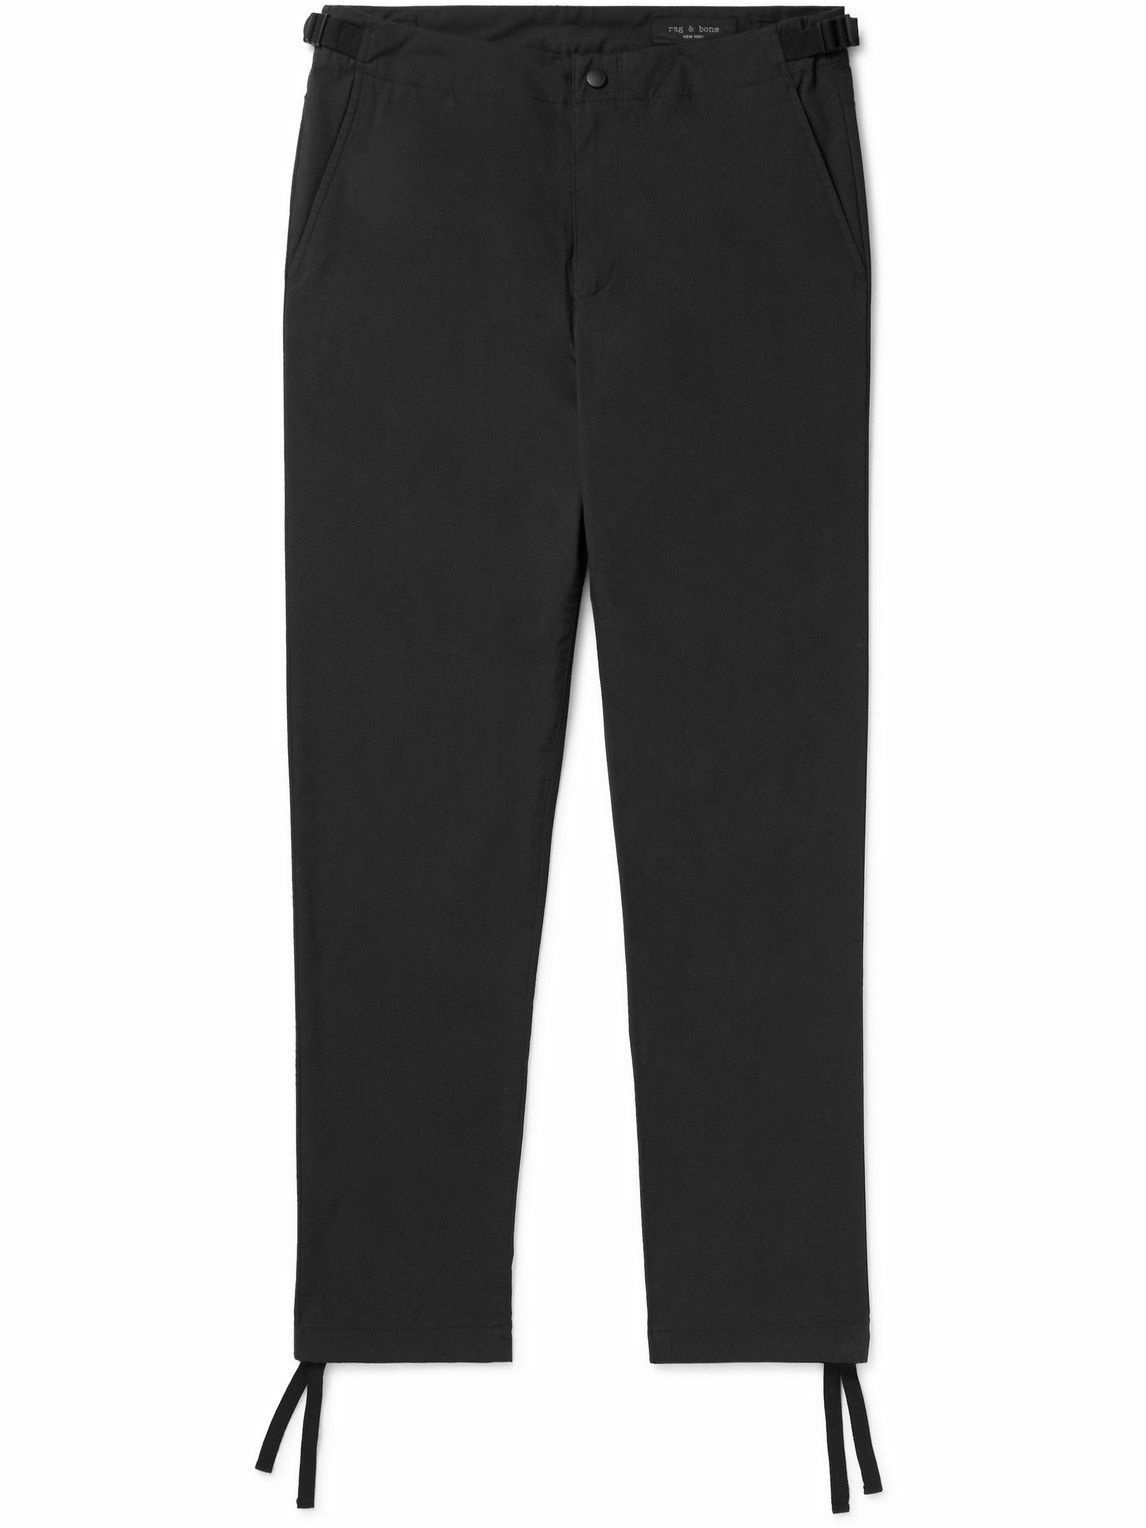 Photo: Rag & Bone - Precision Flyweight Tapered Cotton-Blend Trousers - Black